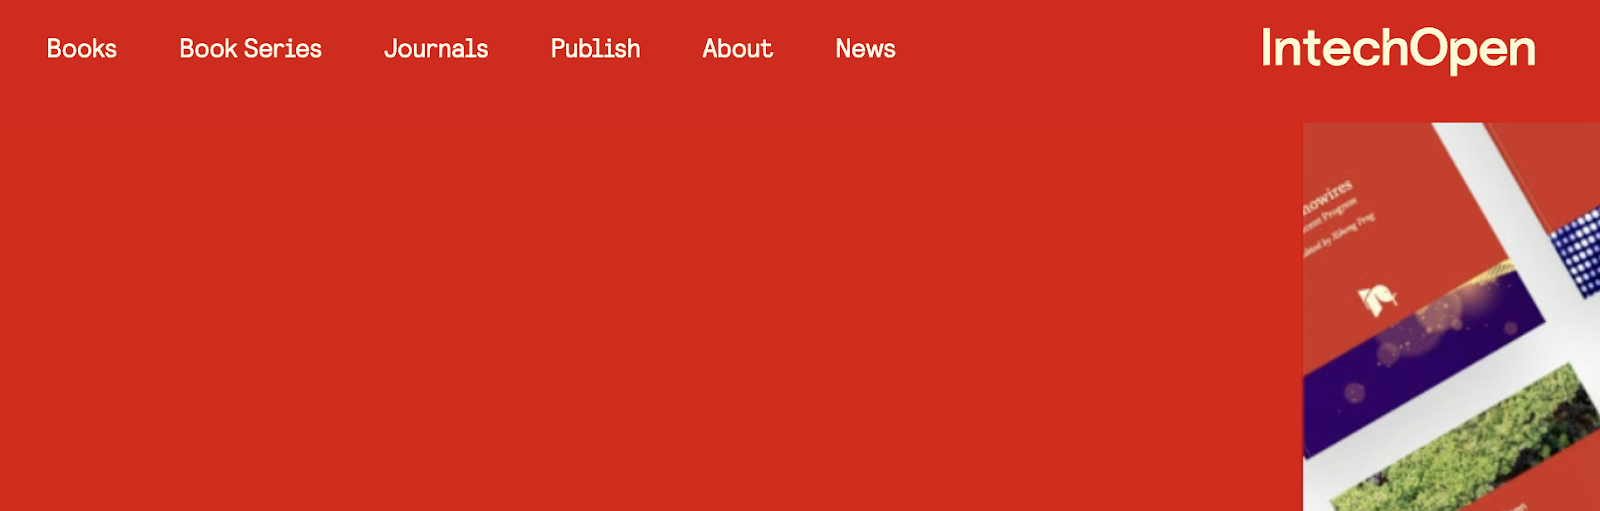 Screenshot of website. Lists from left to right Books, Book Series, Journals, Publish, About, and News. 
